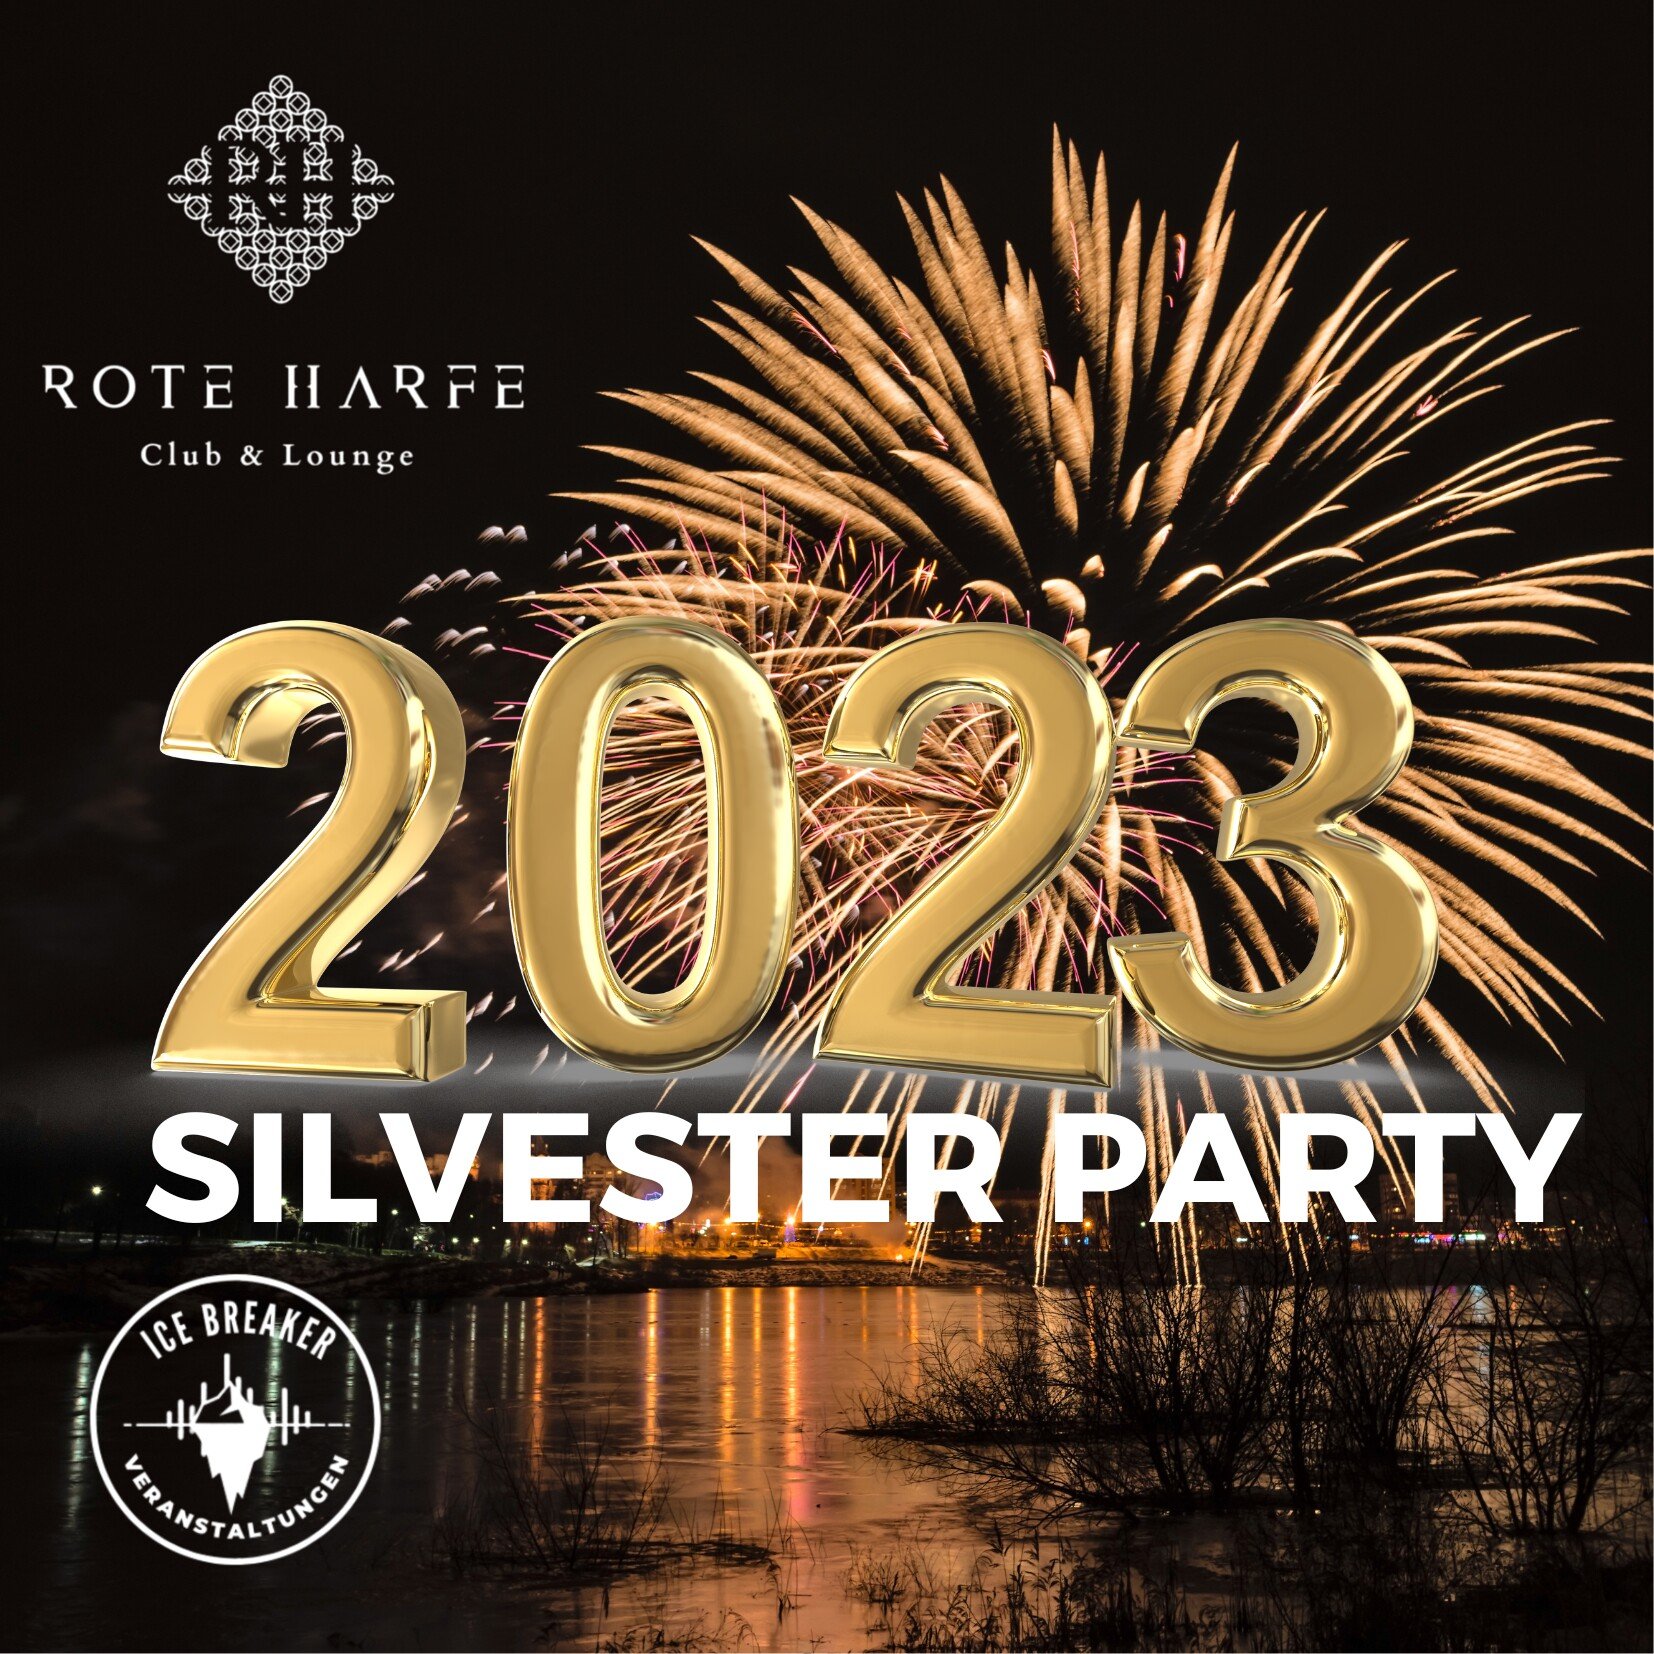 Rote Harfe Mitte Berlin Rote Harfe Silvester Party by Ice Breaker